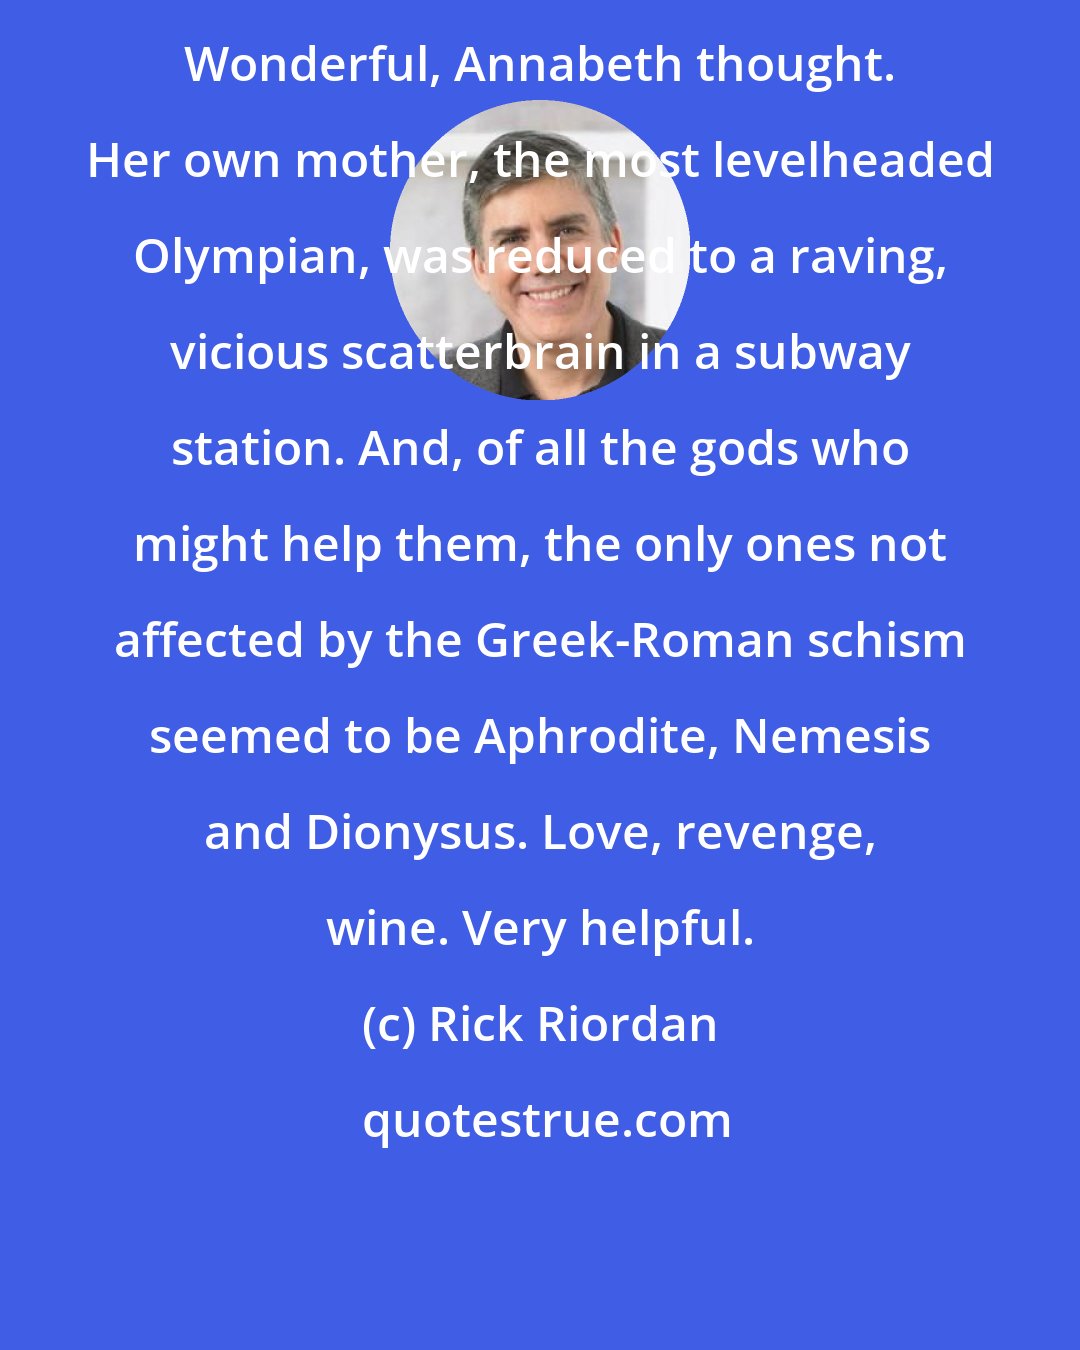 Rick Riordan: Wonderful, Annabeth thought. Her own mother, the most levelheaded Olympian, was reduced to a raving, vicious scatterbrain in a subway station. And, of all the gods who might help them, the only ones not affected by the Greek-Roman schism seemed to be Aphrodite, Nemesis and Dionysus. Love, revenge, wine. Very helpful.